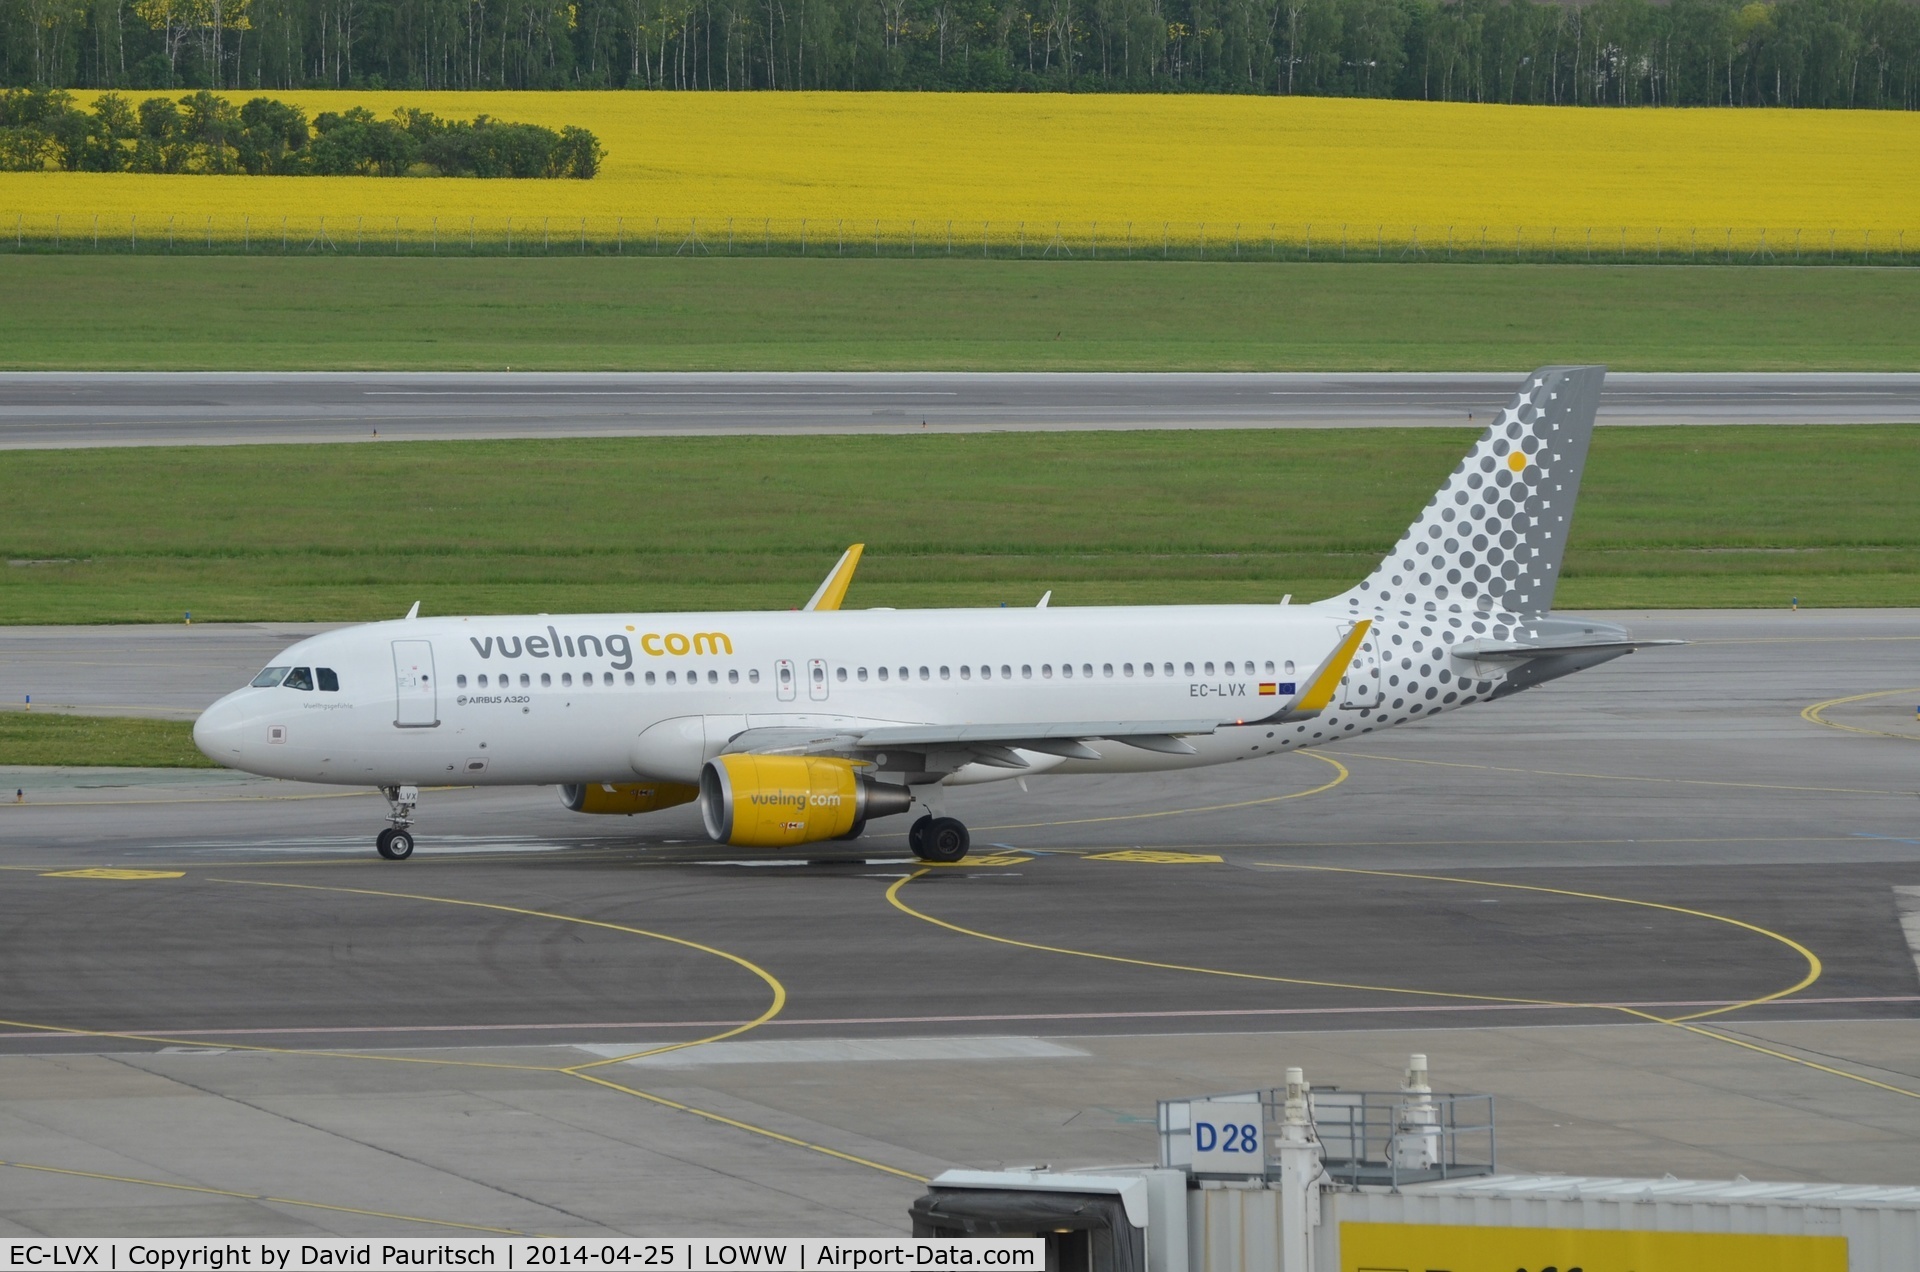 EC-LVX, 2013 Airbus A320-214 C/N 5673, Vueling with Sharklets